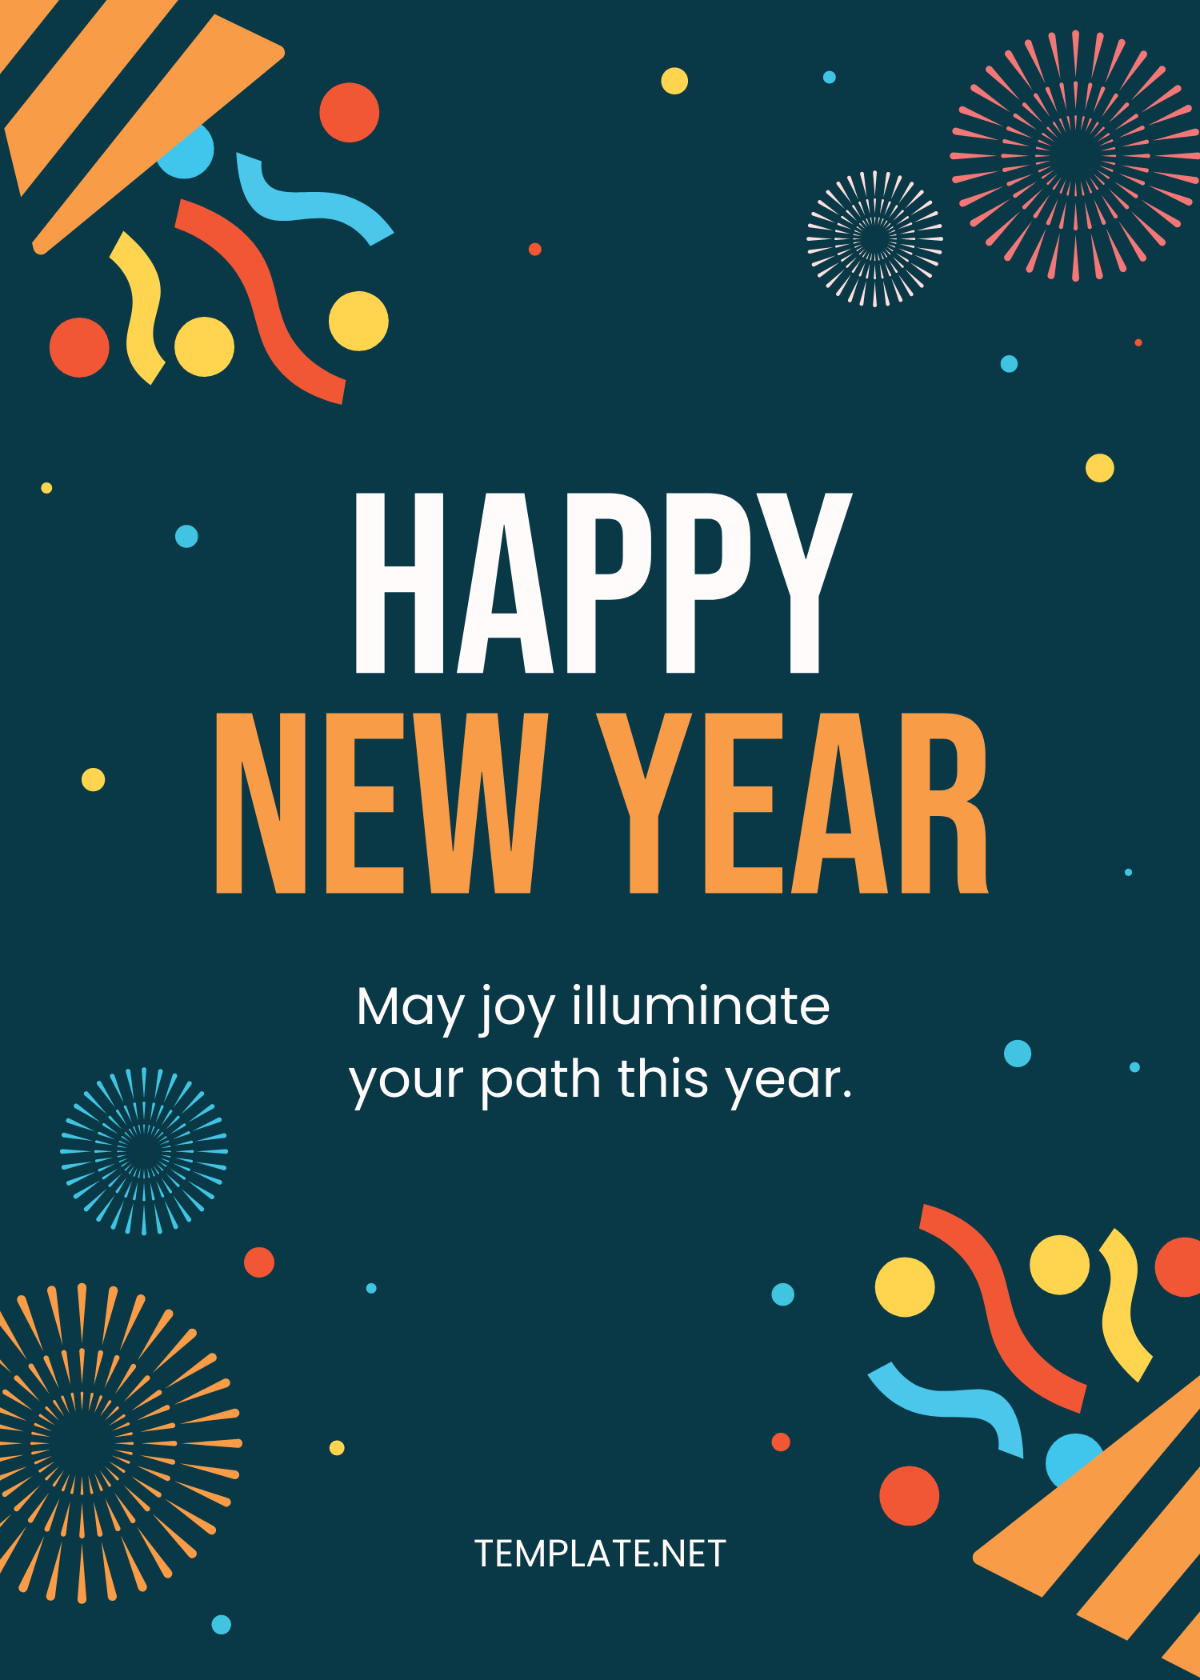 Happy New Year 2024 Banner, Classroom Resources